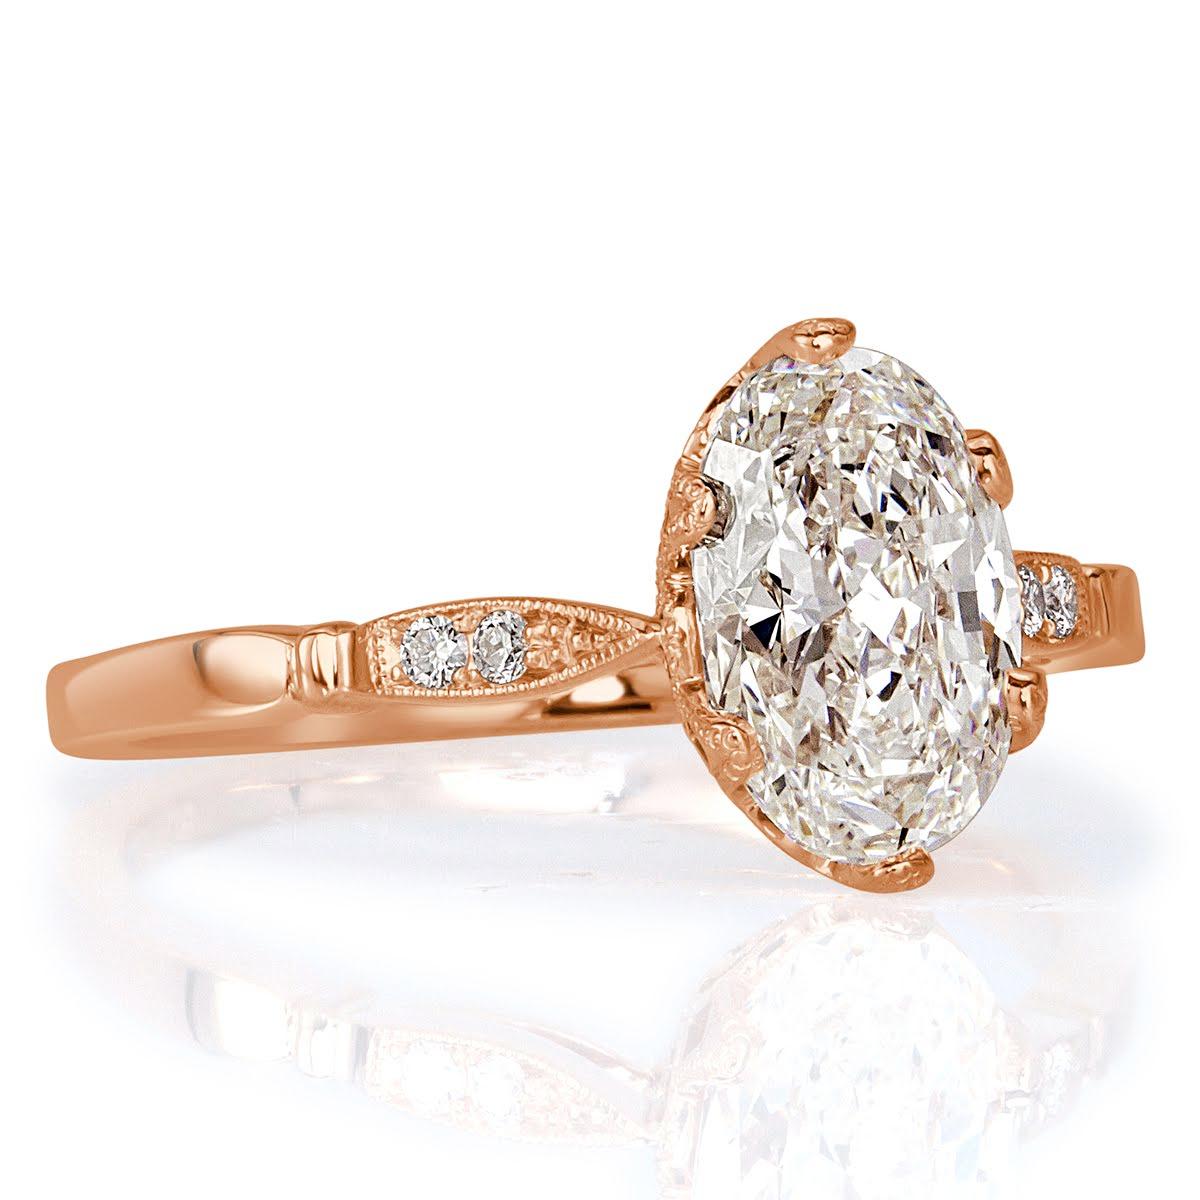 This exquisite diamond engagement ring showcases a gorgeous 1.50ct oval cut center diamond, GIA certified at I in color, VS1 in clarity. It is hand set in a beautiful antique, 18k rose gold setting style graced by two smaller round diamonds on